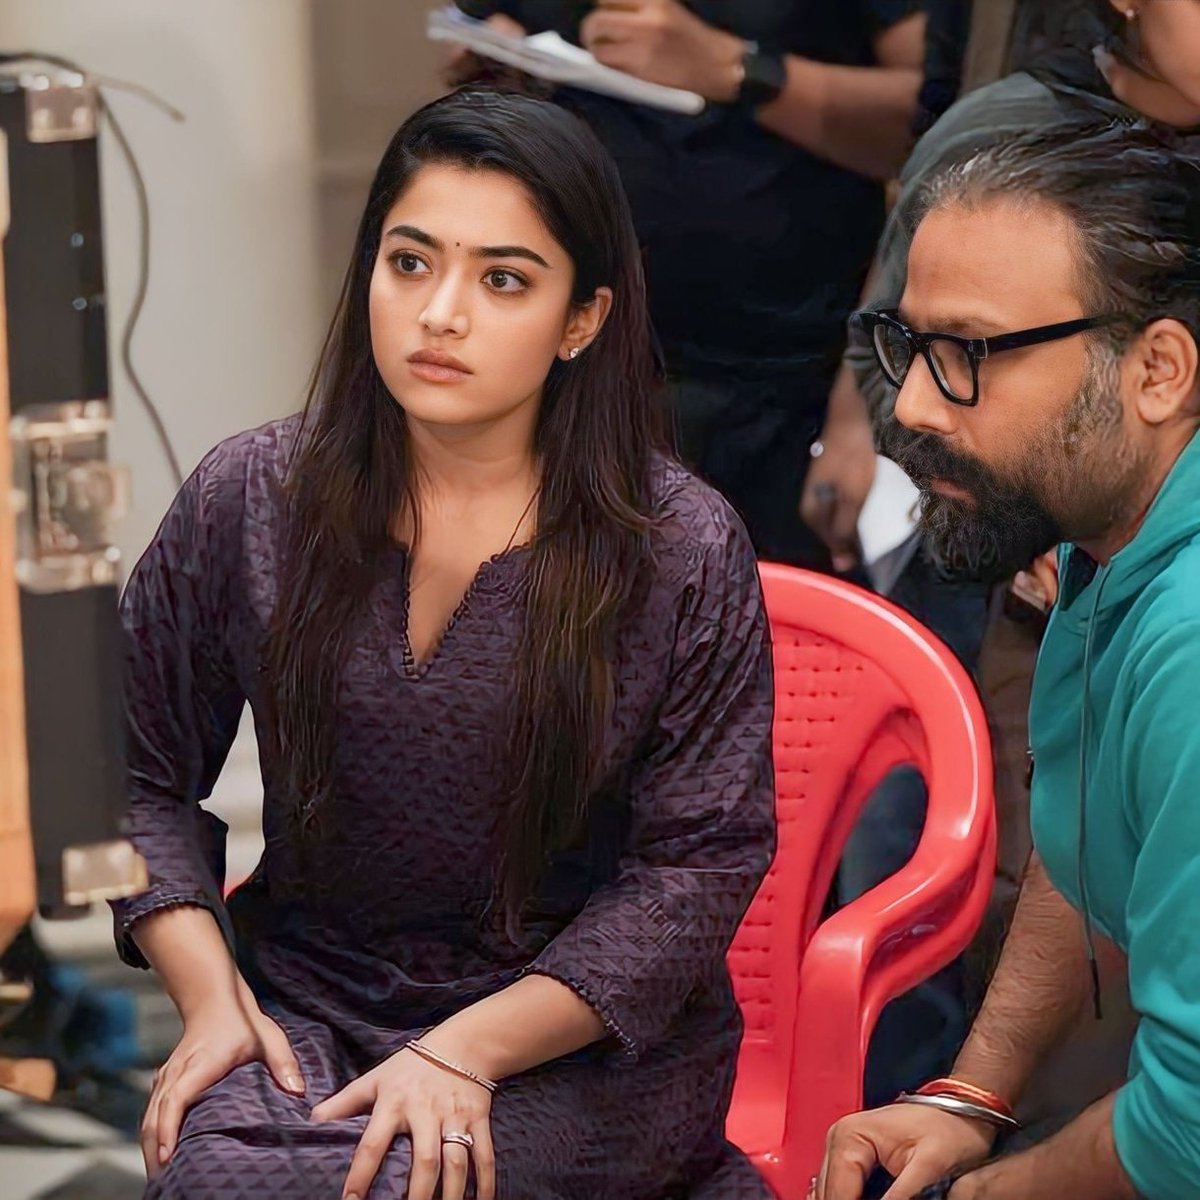 Spotlight on the serious faces – it's easy to critique, but doing the work reveals the true effort. @iamRashmika shines as Geetanjali, her charm and stellar acting winning hearts all around. Now waiting for Srivalli Song 🔥 #RashmikaMandanna ❤️🔥